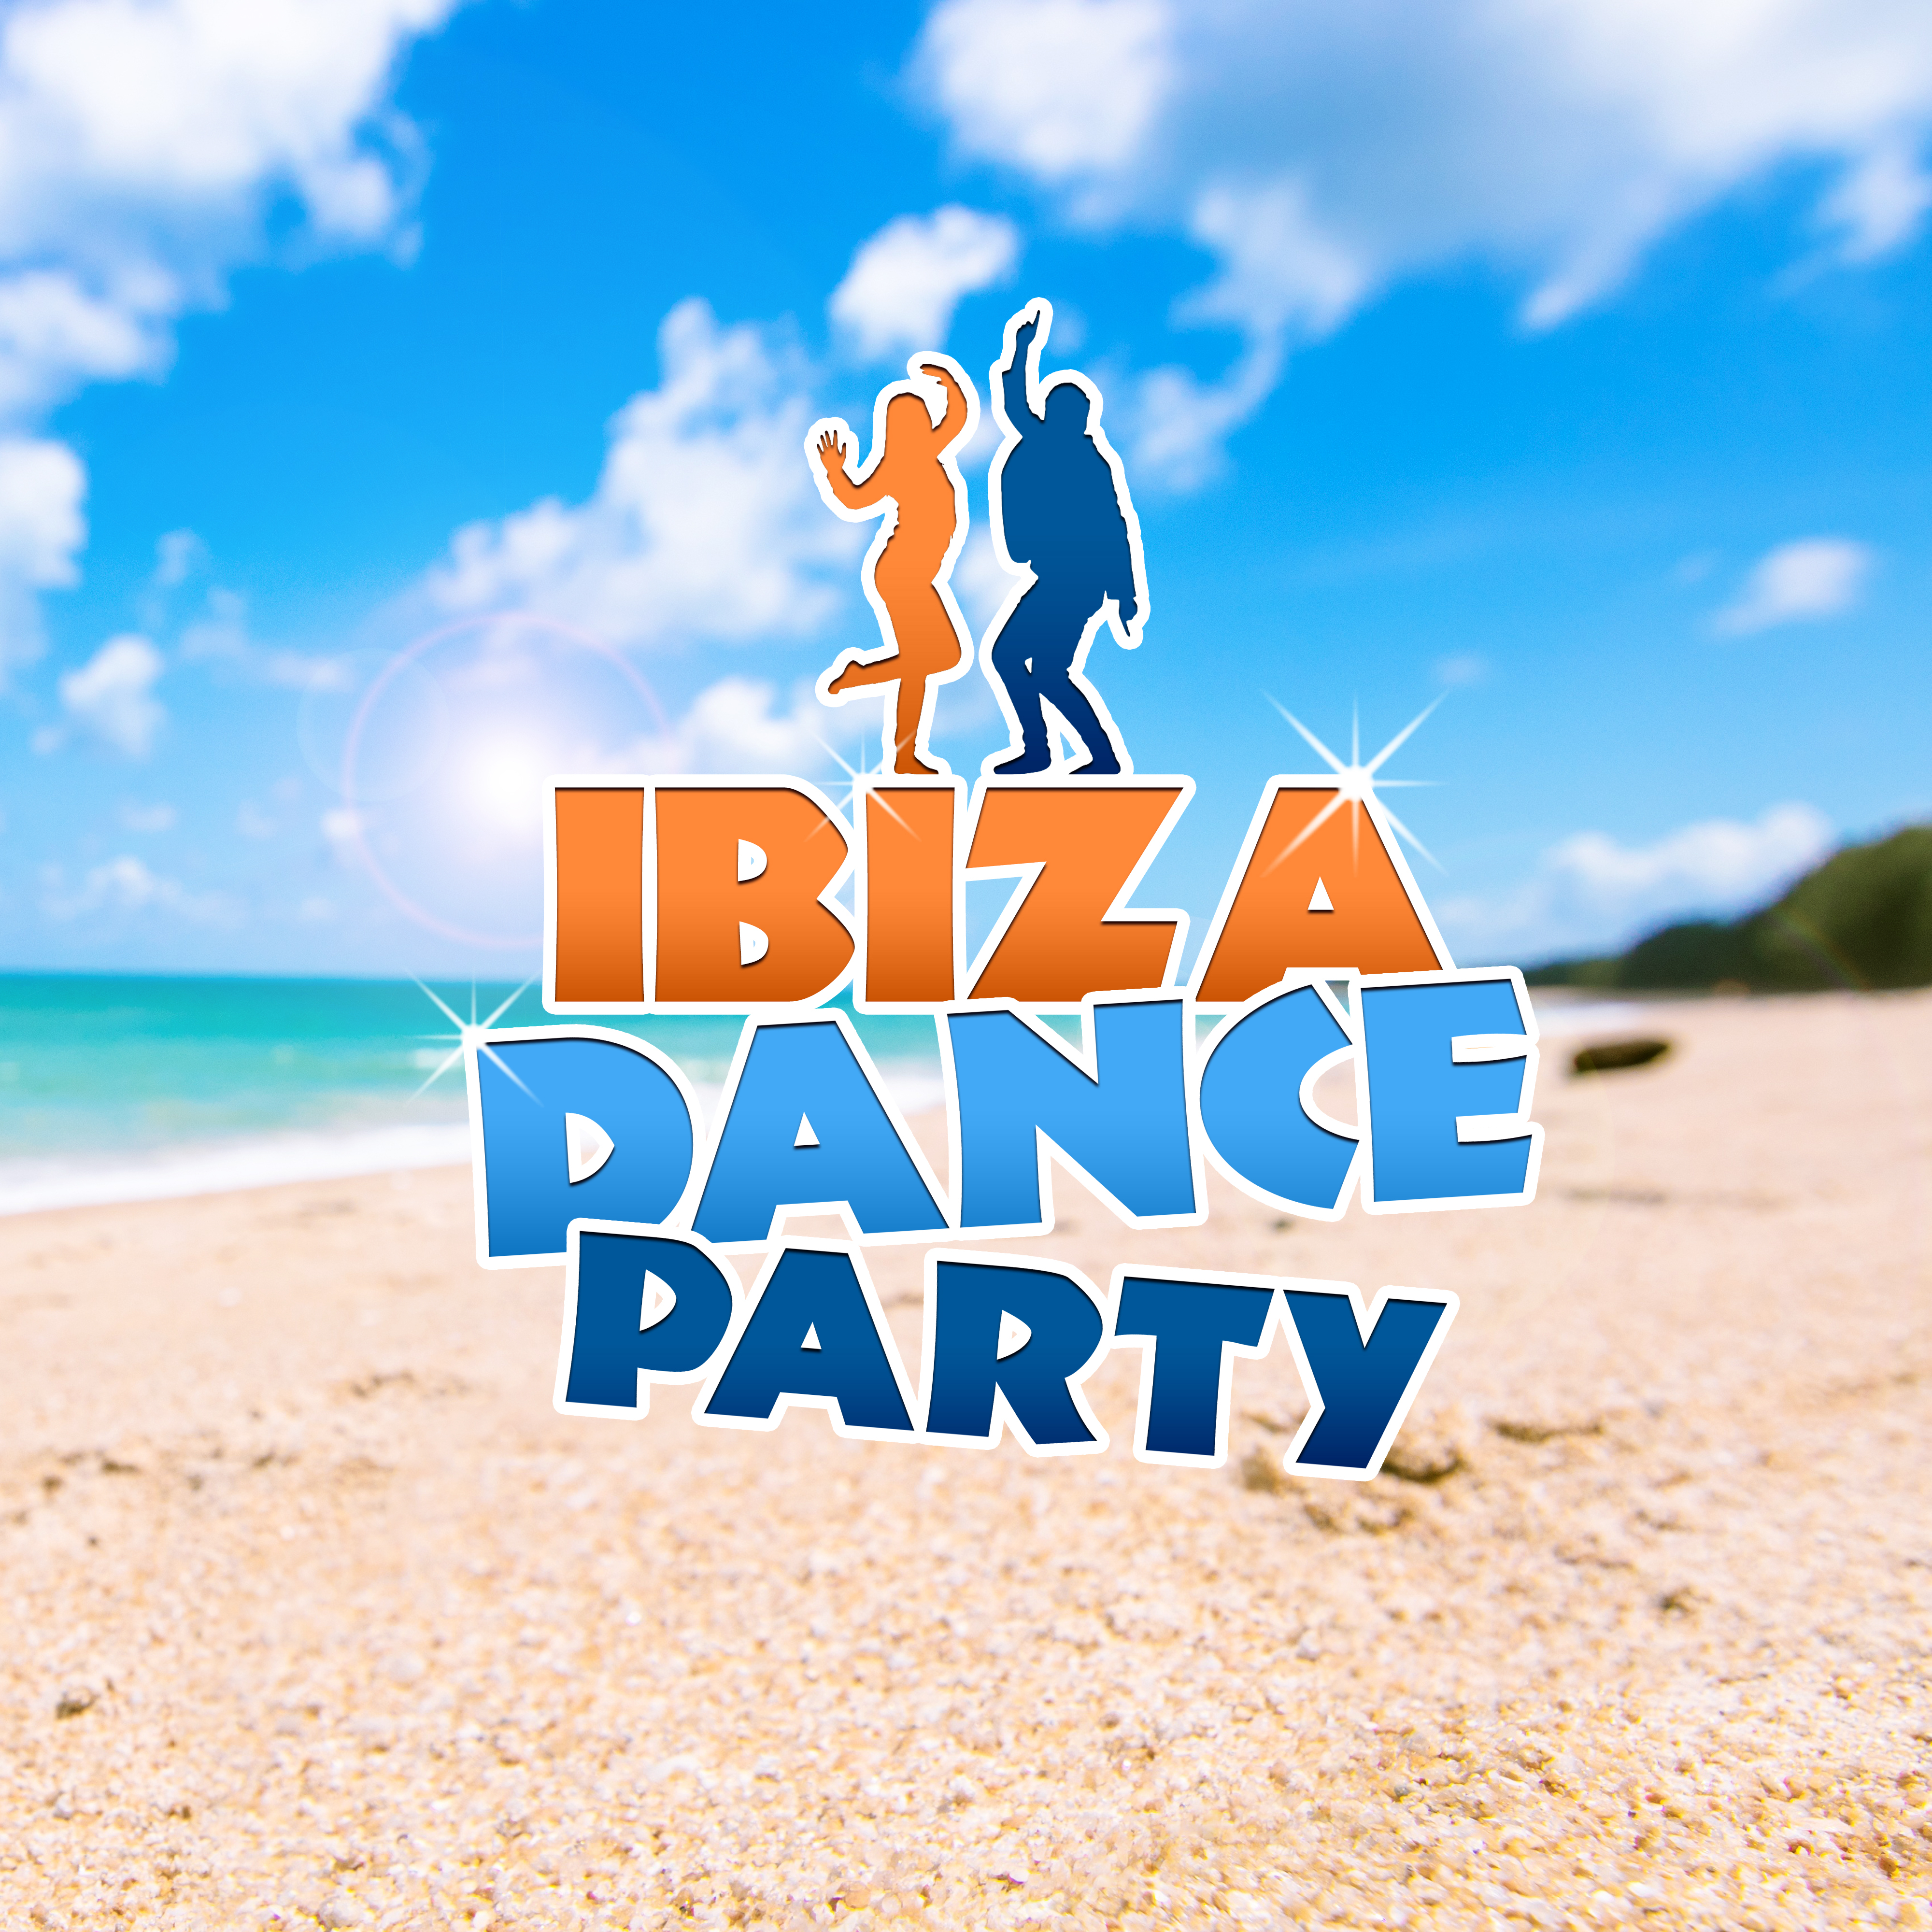 Ibiza Dance Party  Chill Out 2017, Summer Hits, Beach Disco, Party Night, Dancefloor,  Vibes, Ibiza Chillout